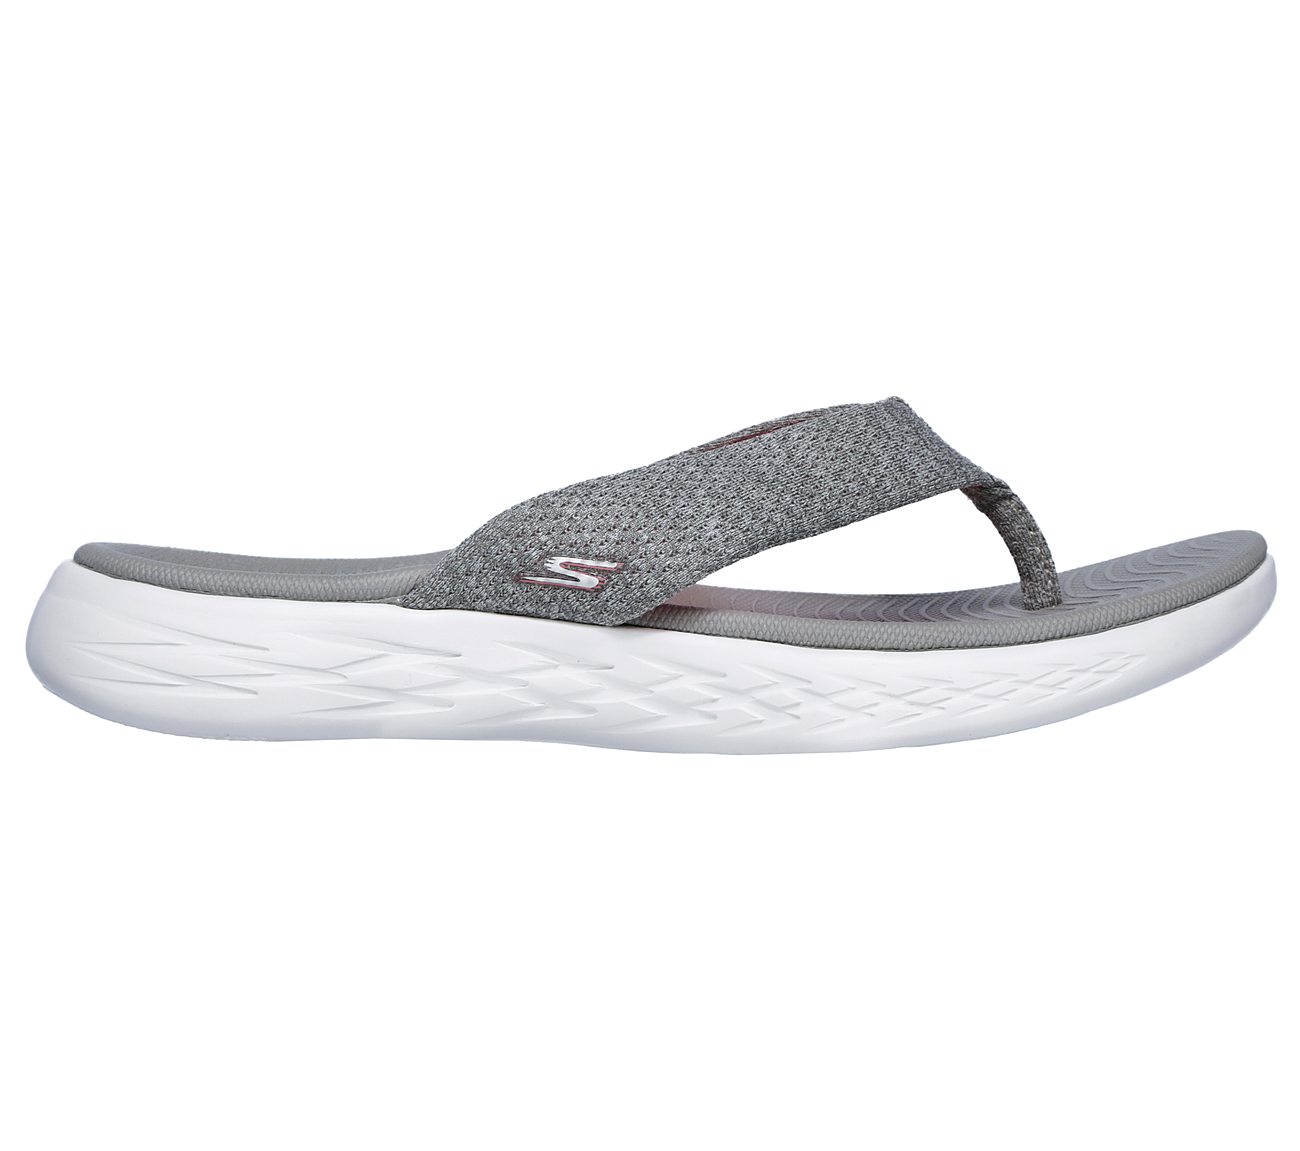 ON-THE-GO 600 - PREFERRED, GREY/PINK Footwear Right View